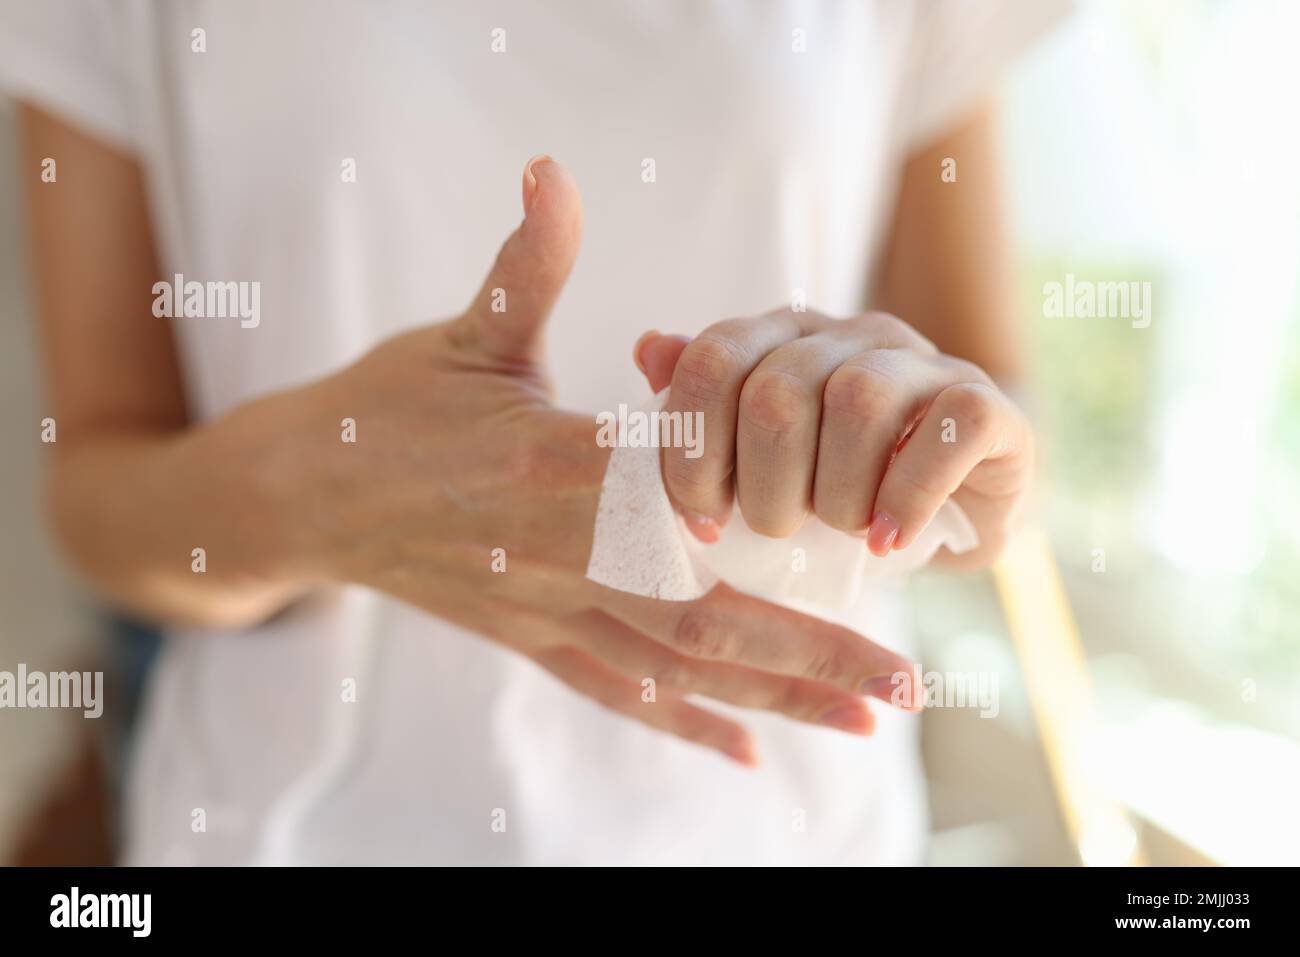 Woman cleans her hands close-up. Hand skin care. Stock Photo